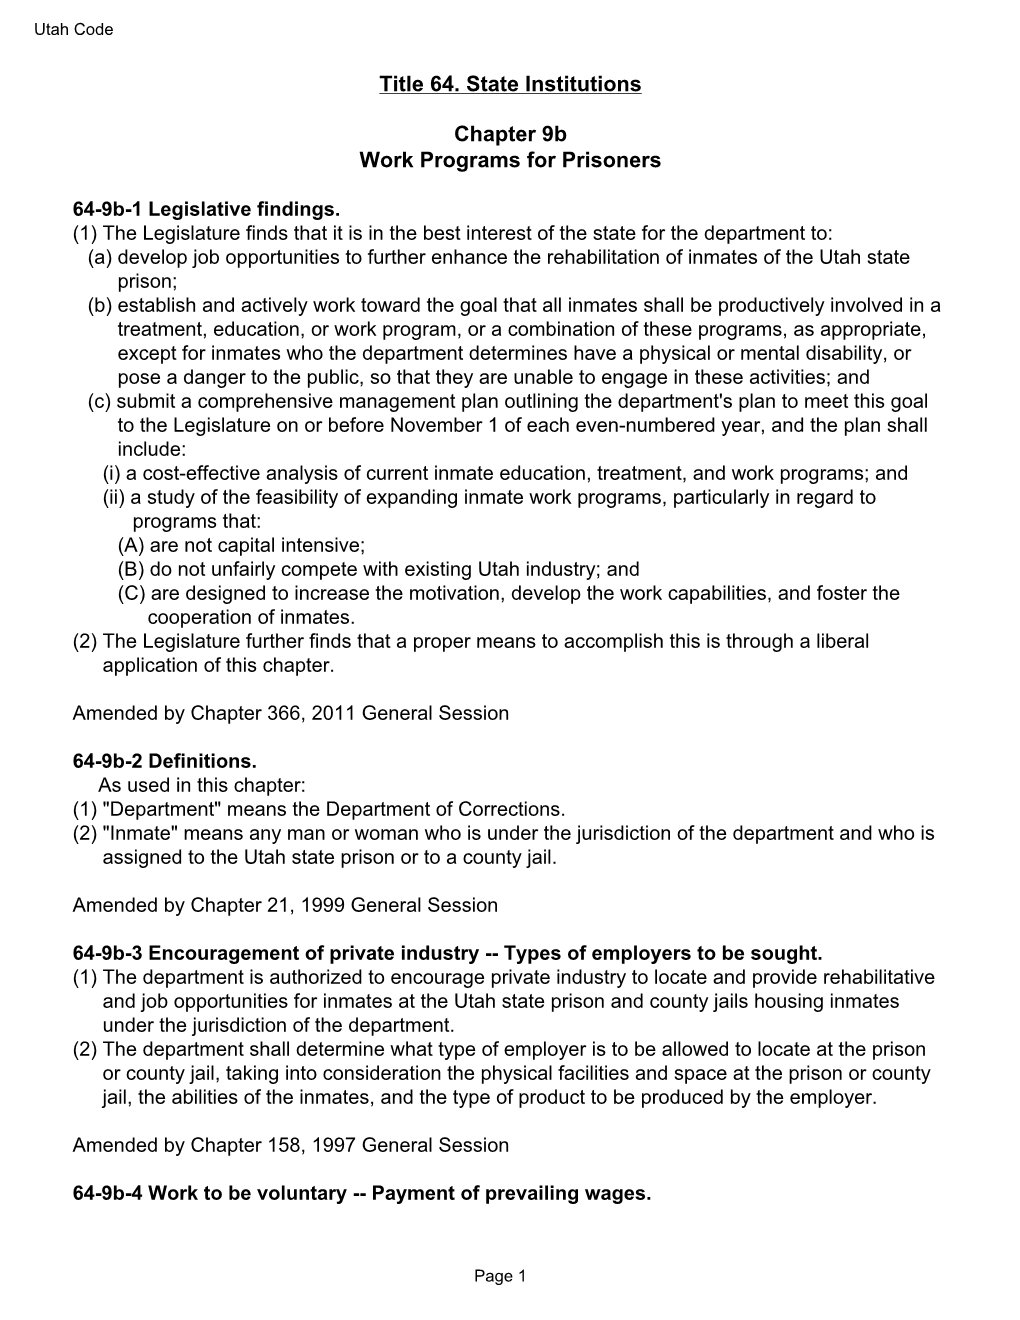 Title 64. State Institutions Chapter 9B Work Programs for Prisoners